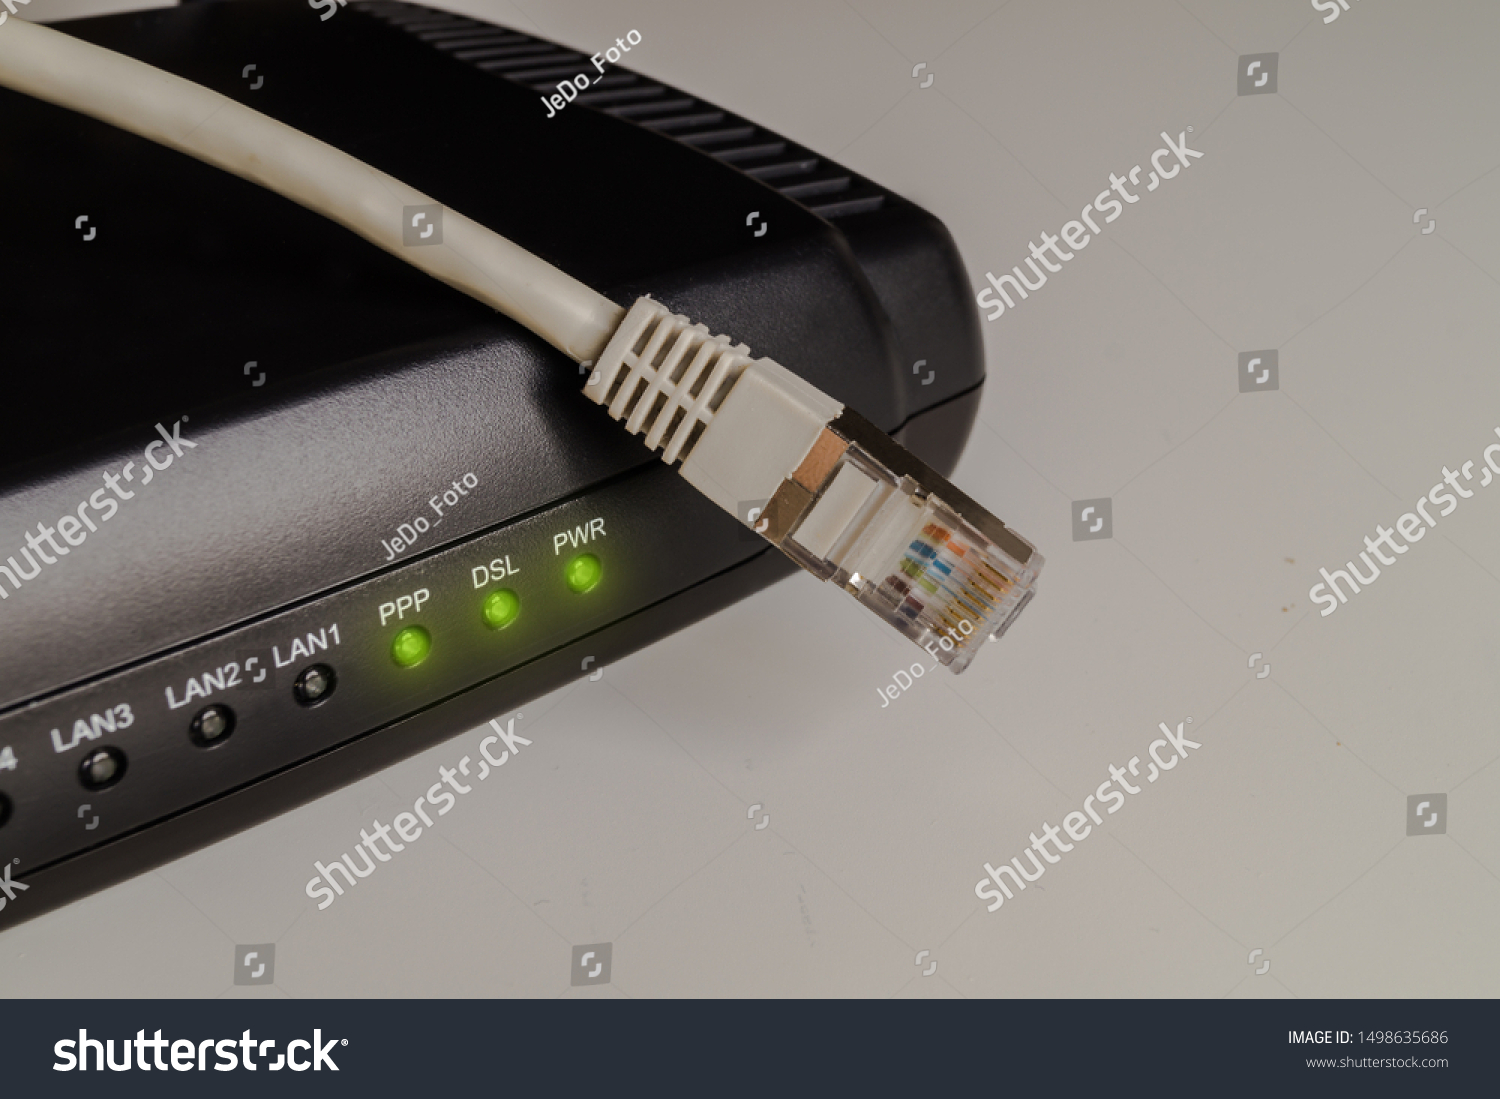 Black dsl modem or router with a network cable on a table. Concept picture for internet, wlan or mobil connections. #1498635686